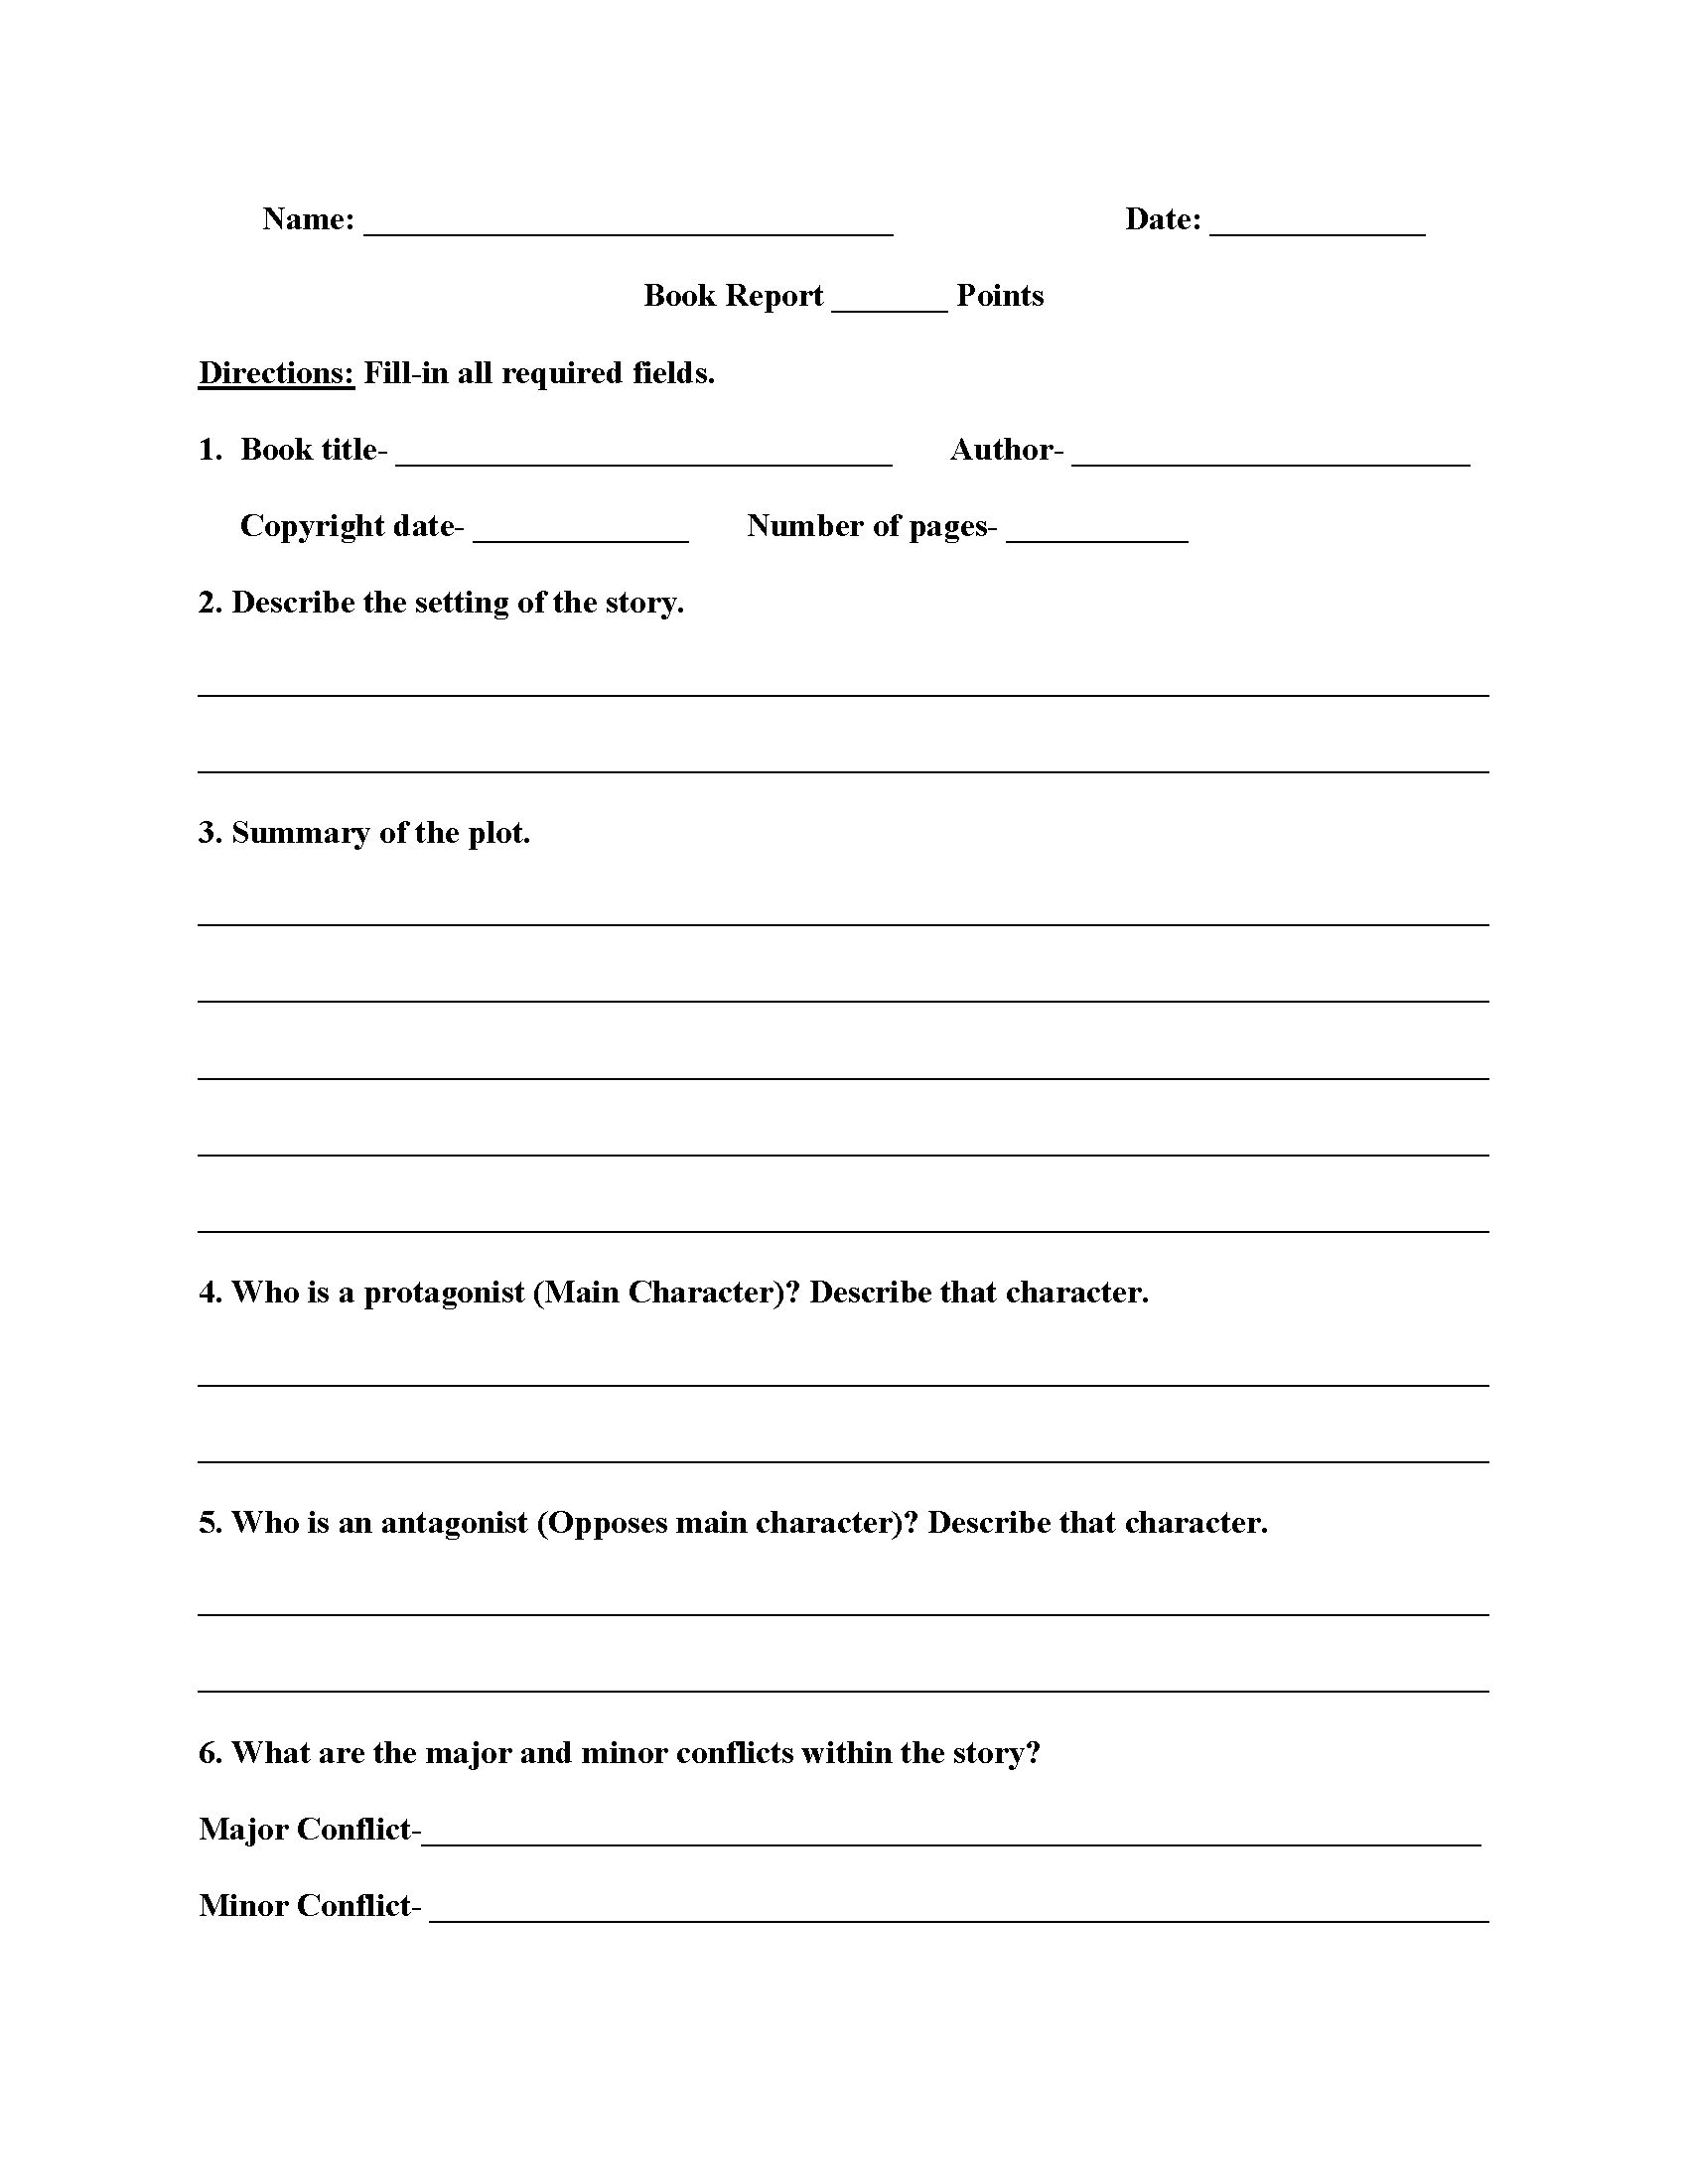 High School Book Report Worksheets | Education | High School Books | Printable Grammar Worksheets For Middle School